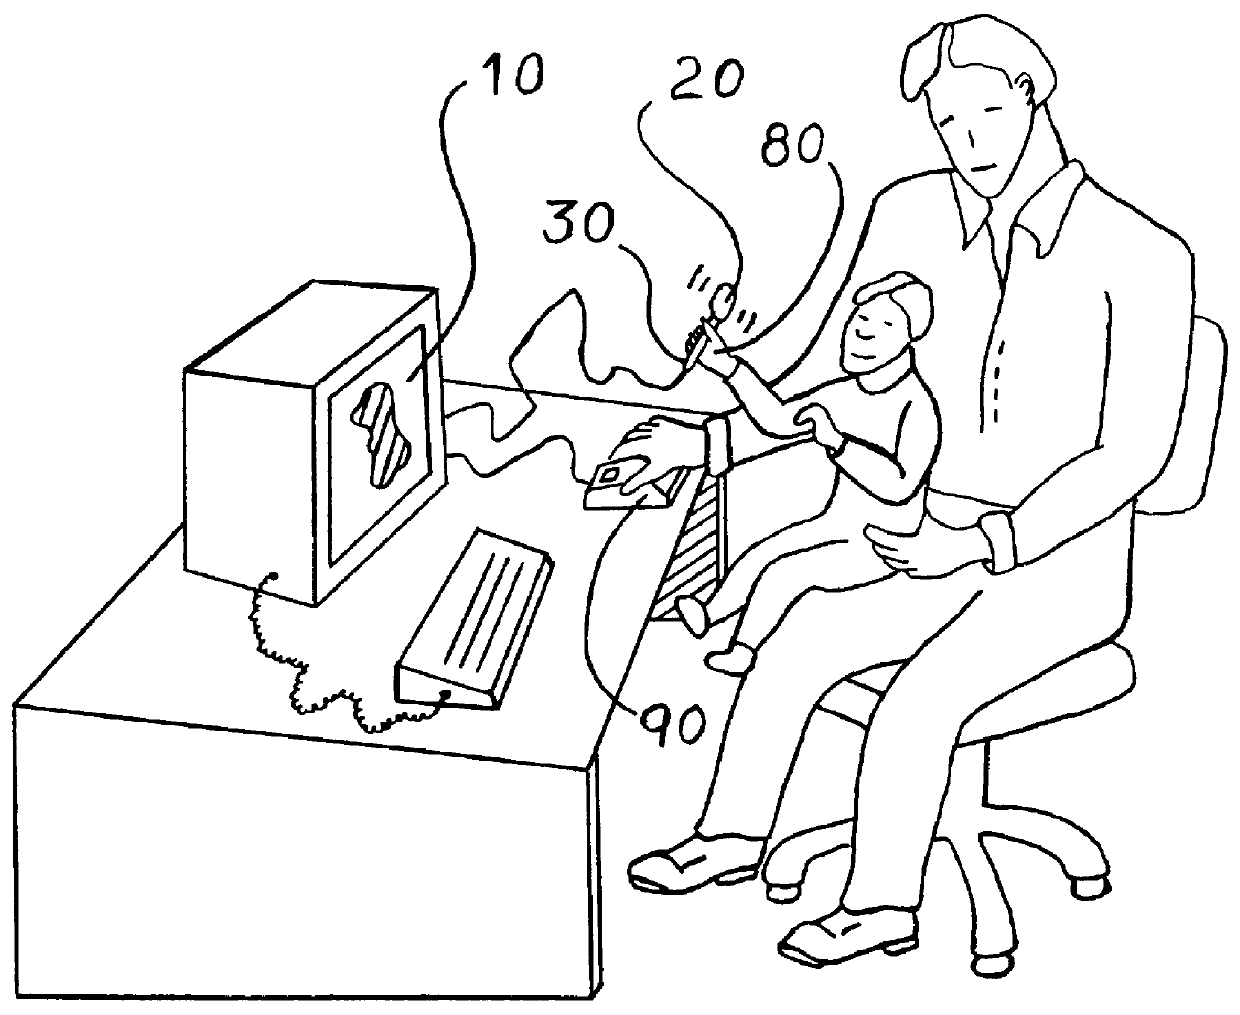 Game controller for infants